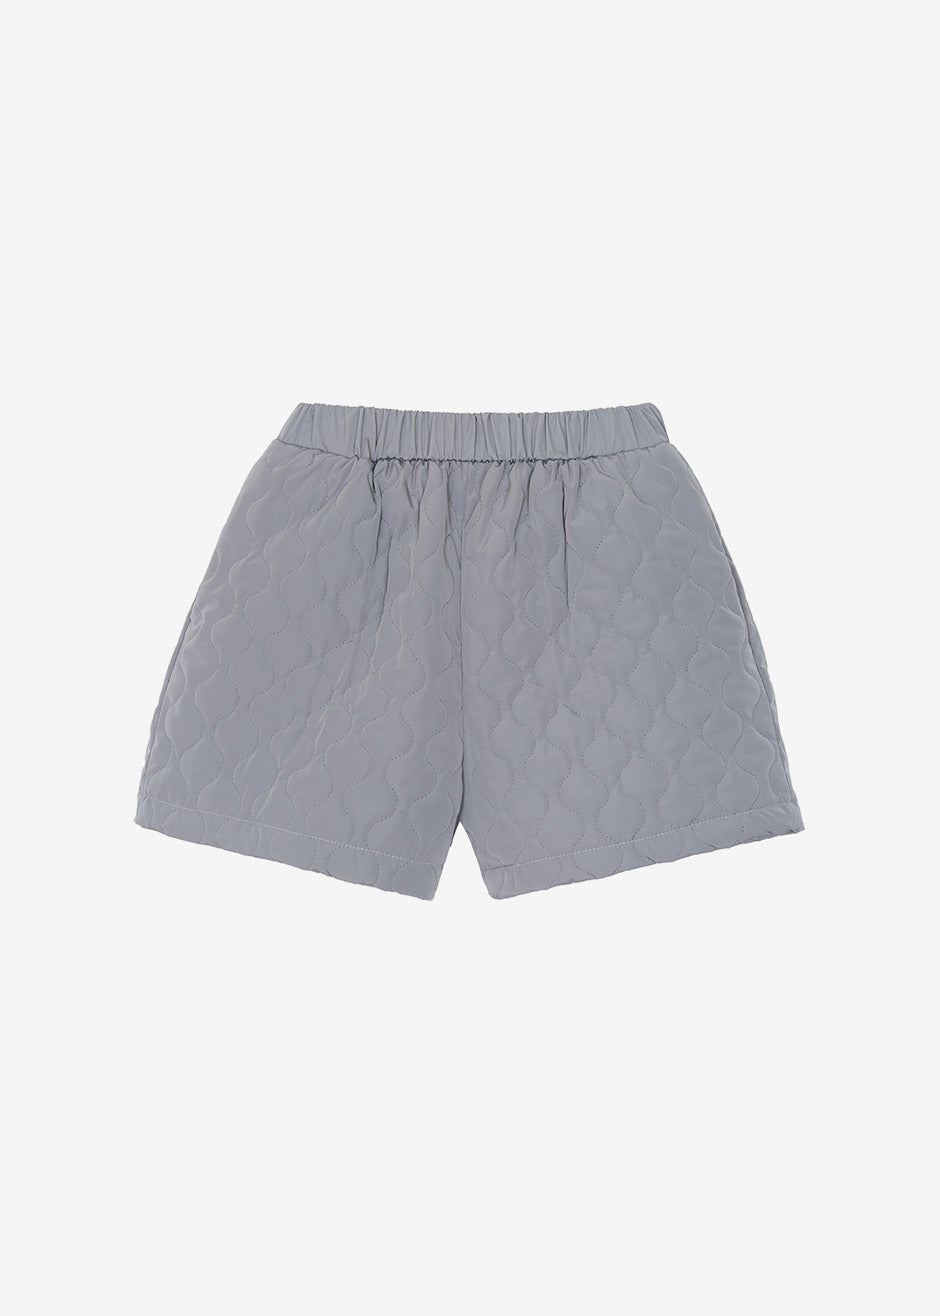 Bienne Quilted Shorts - Charcoal - 10